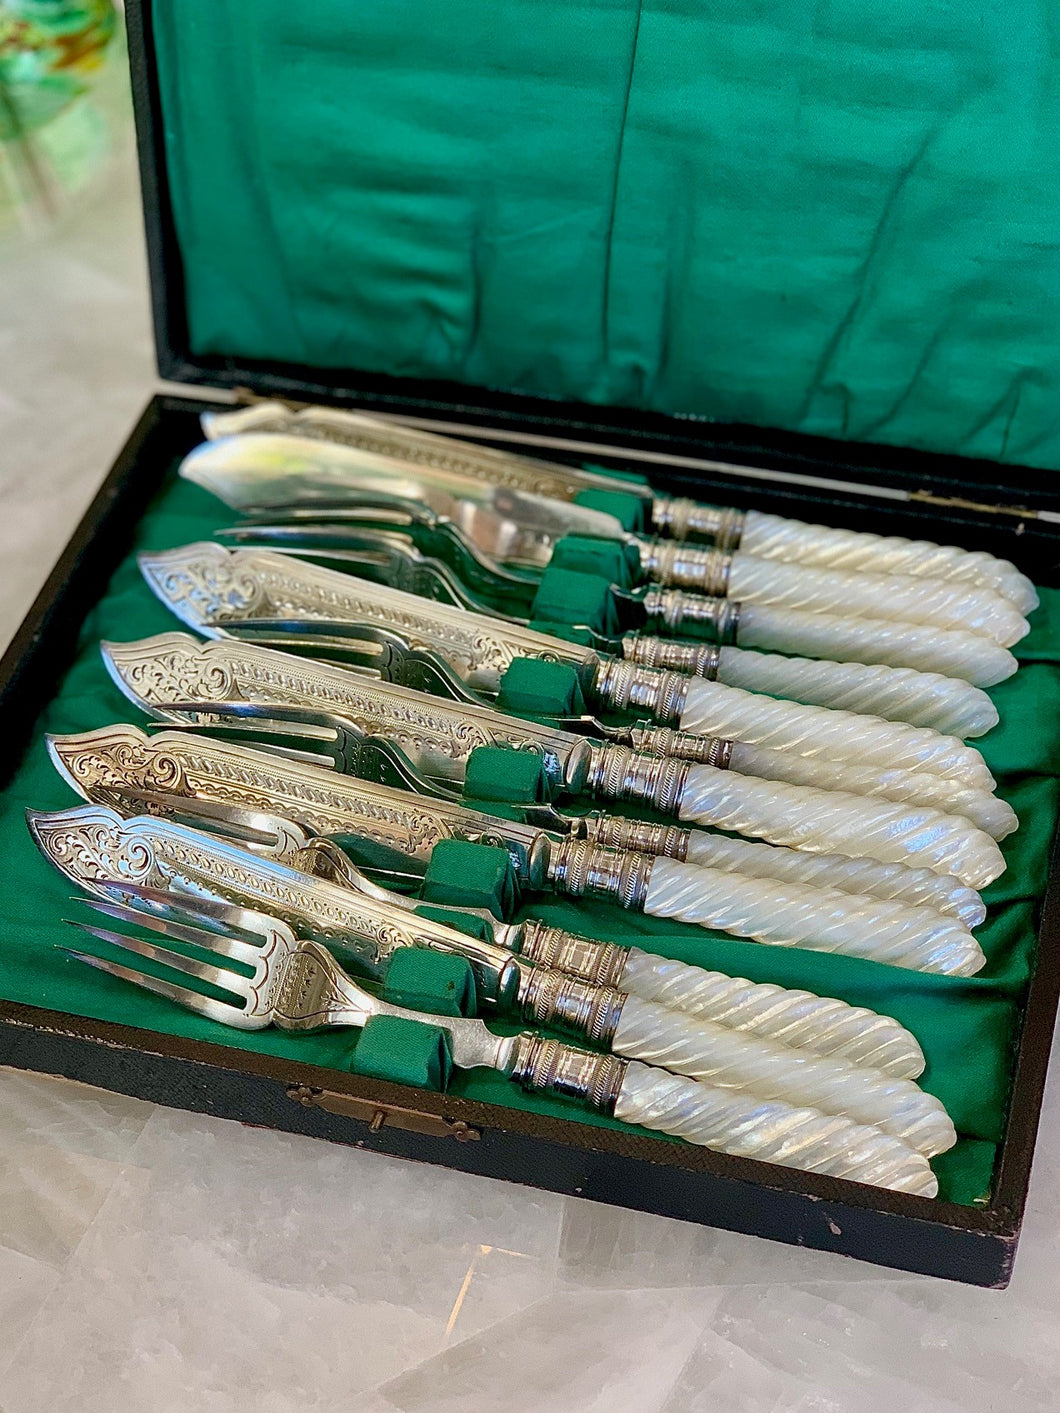 Antique fish flatware set with mother of pearl handles, Henry Wilkinson Ltd, Sheffield, England